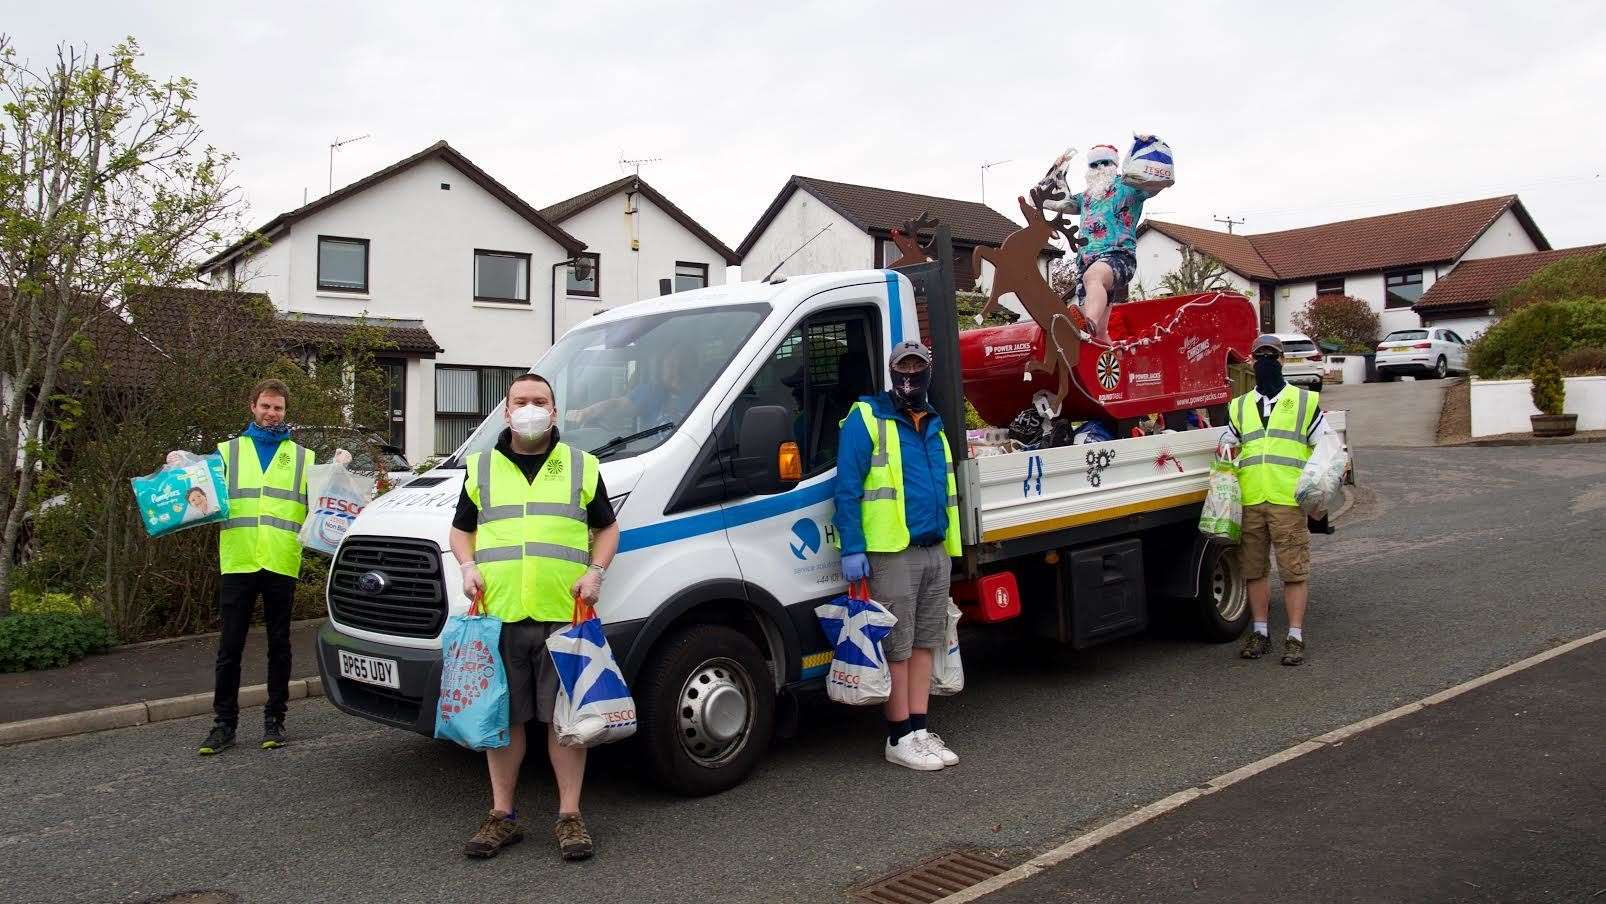 Members of Ellon Round Table helped Santa on his rounds of Ellon. Picture: Phil Harman